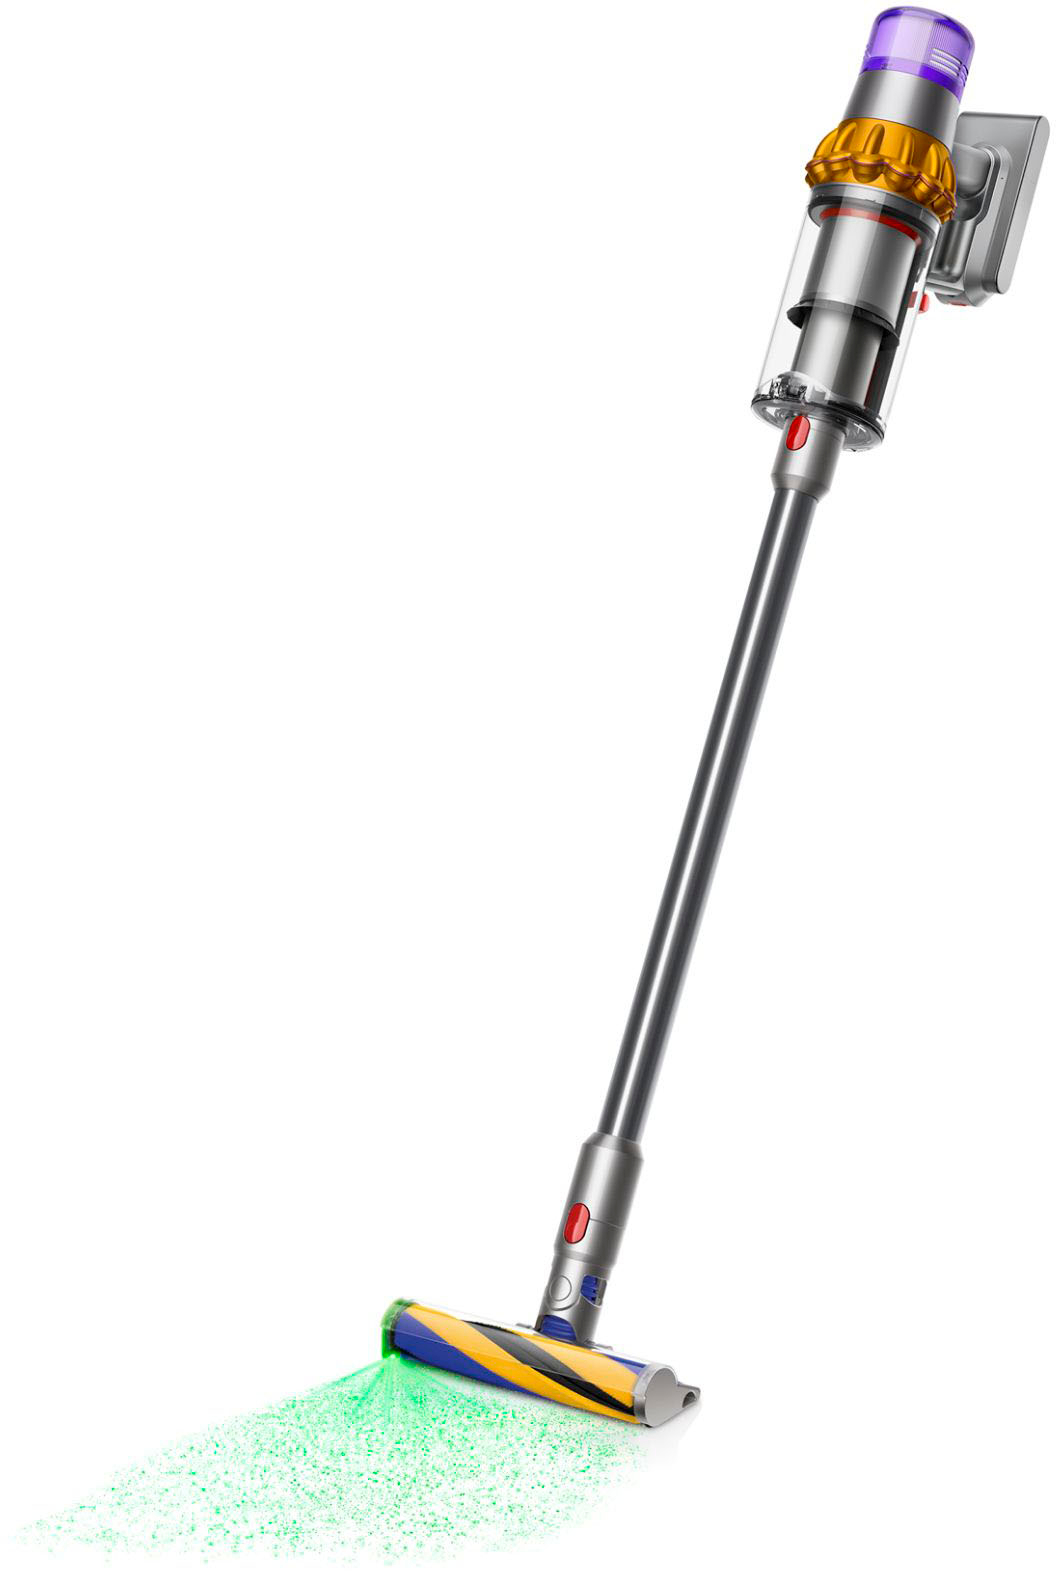 Angle View: Dyson - V15 Detect Extra Cordless Vacuum with 10 accessories - Yellow/Nickel